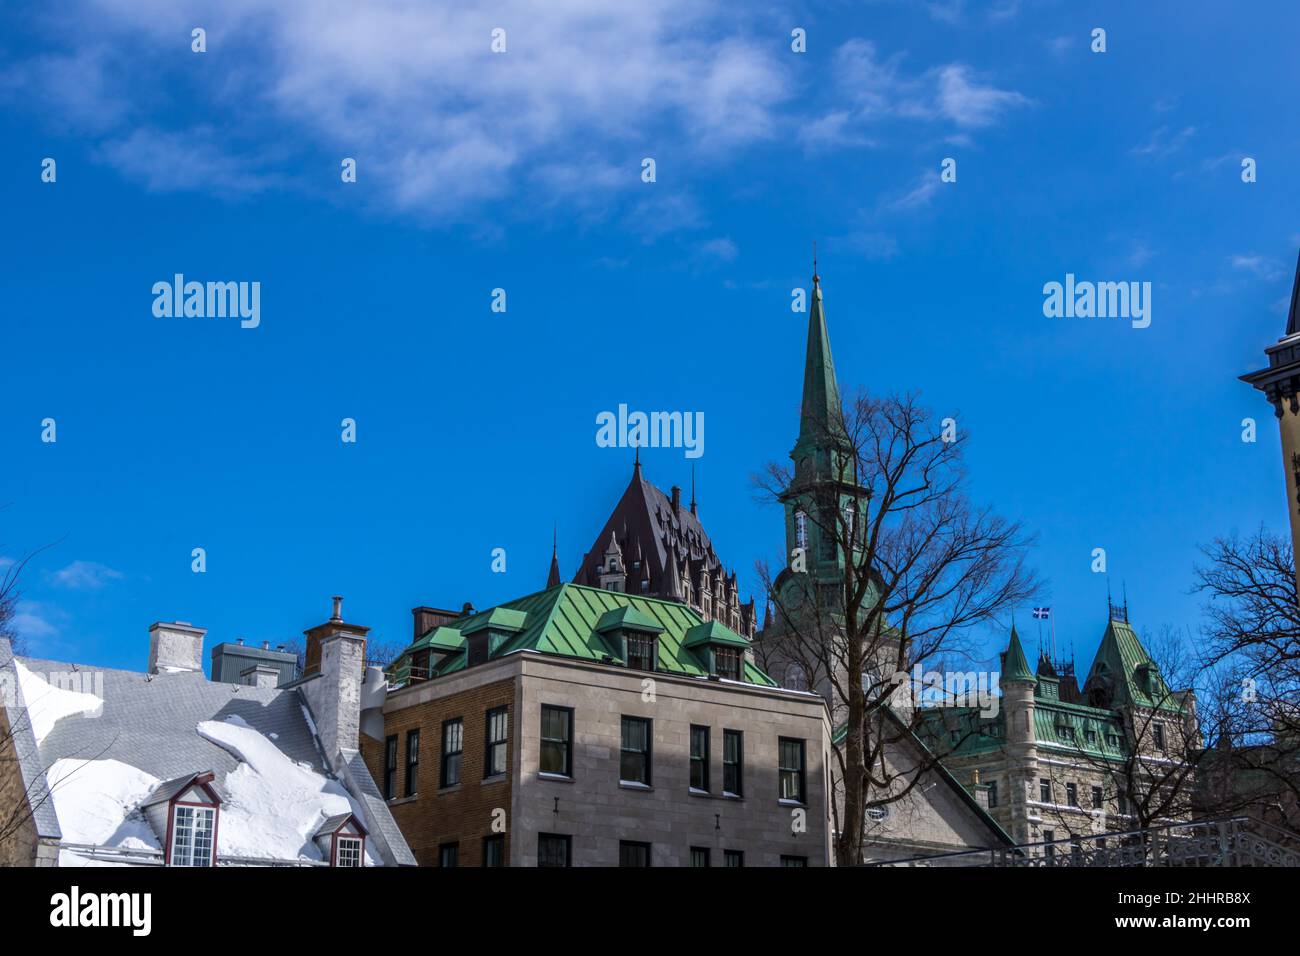 Chateau Frontenac Viewed From Behind City Buildings Stock Photo